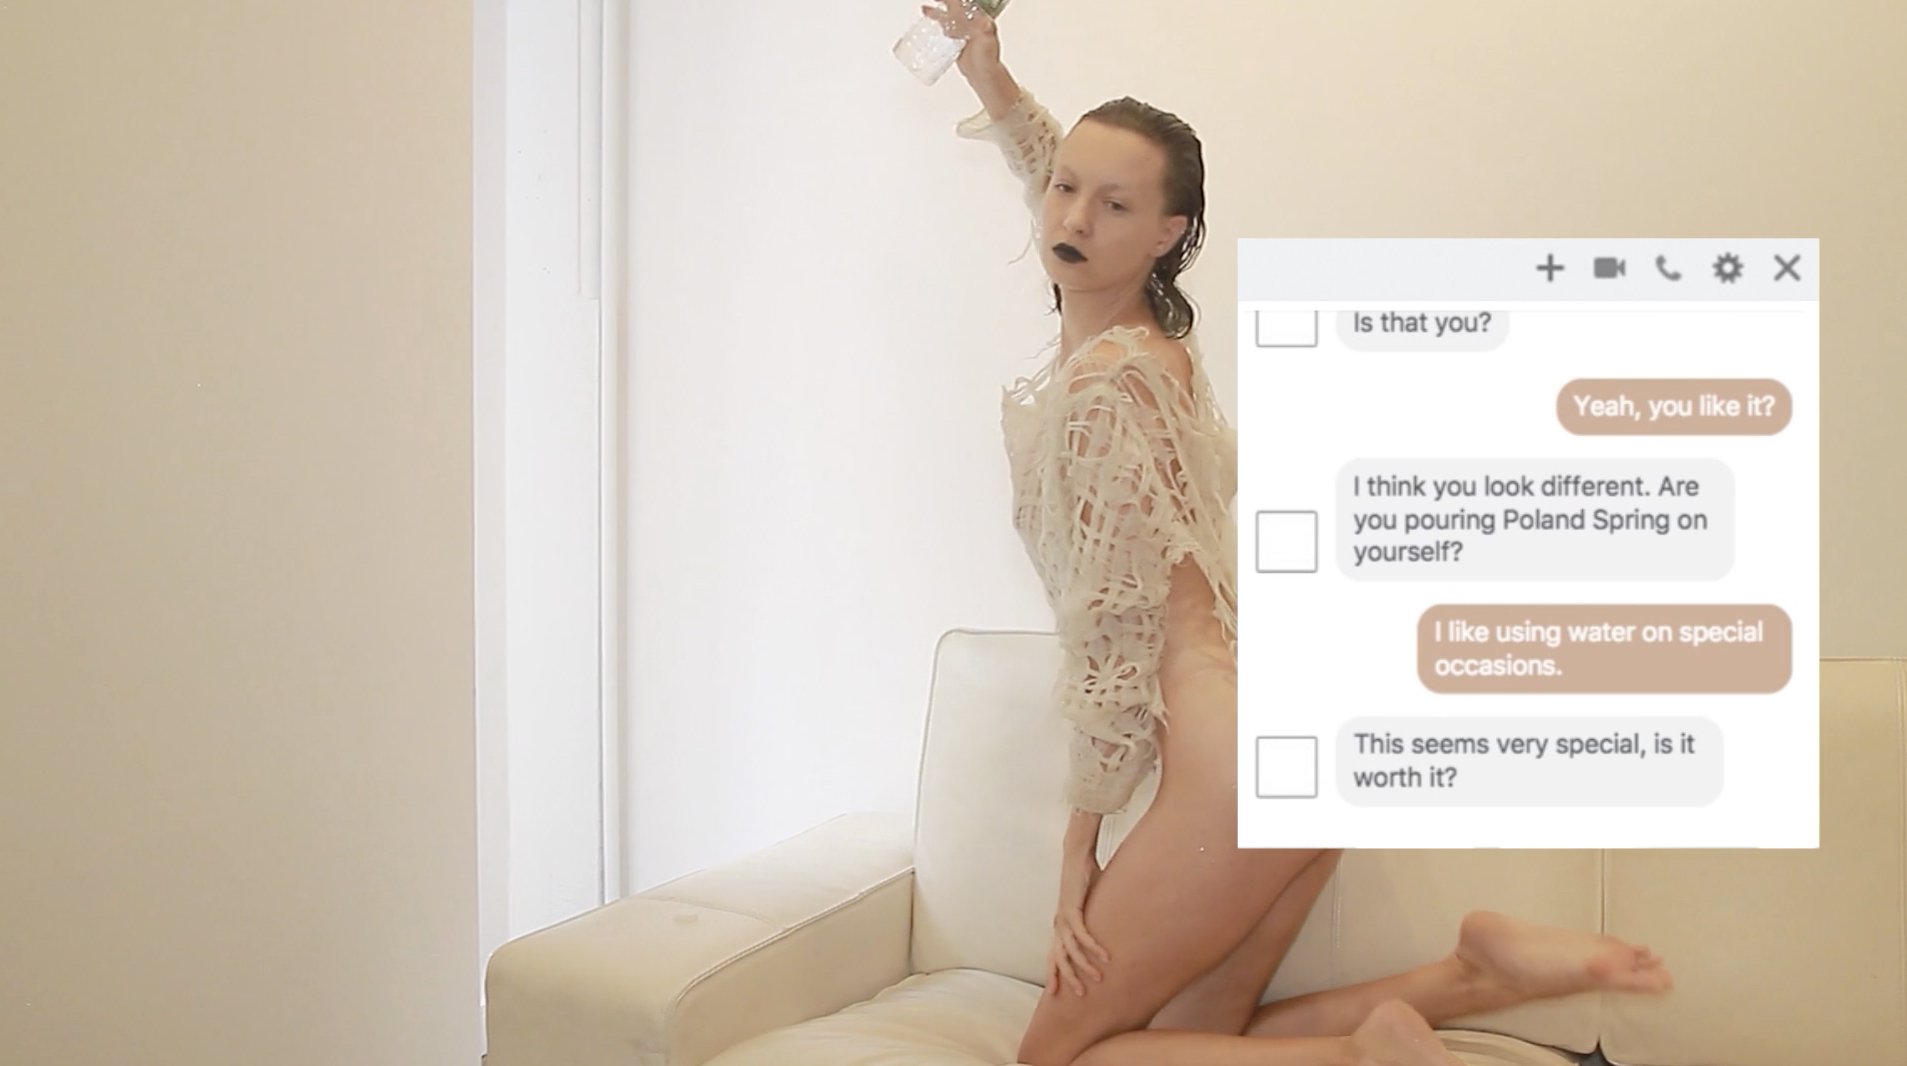 a cream colored room with soft light. A woman with wet hair pours water on herself on a couch in a seductive pose, overlaid with a text message thread